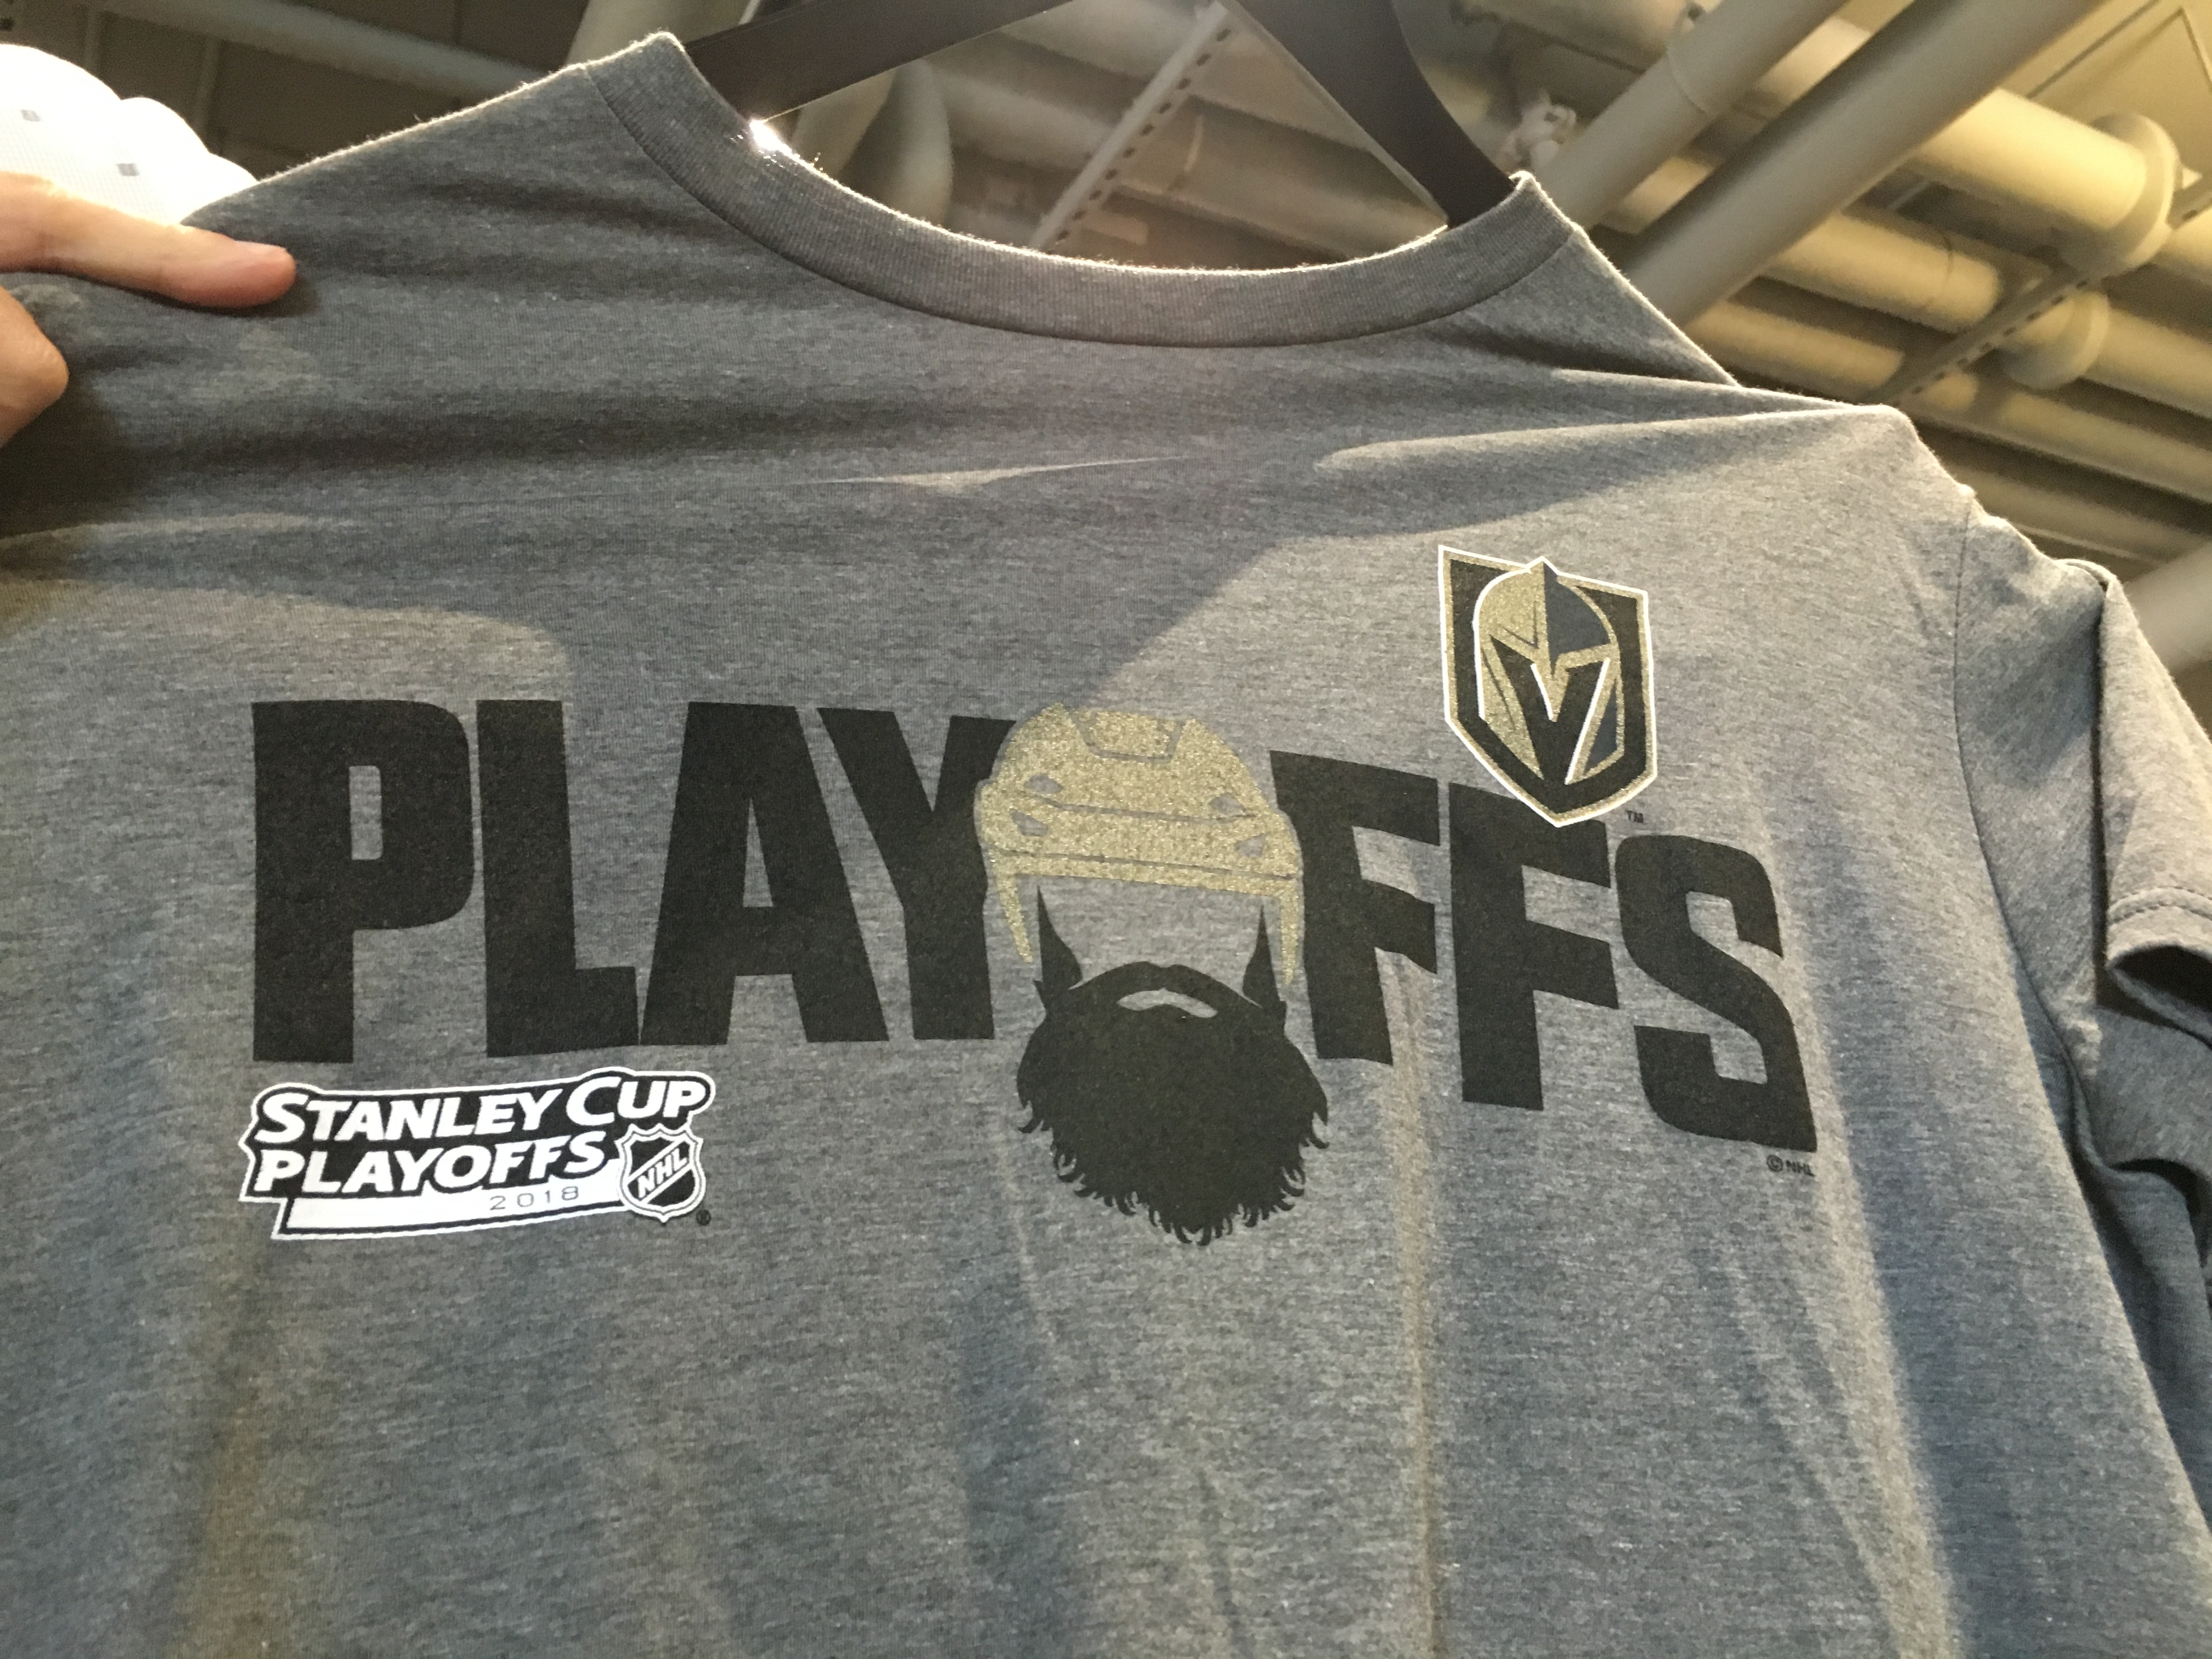 VGK swag in high demand as Knights head to 2nd Stanley Cup Final